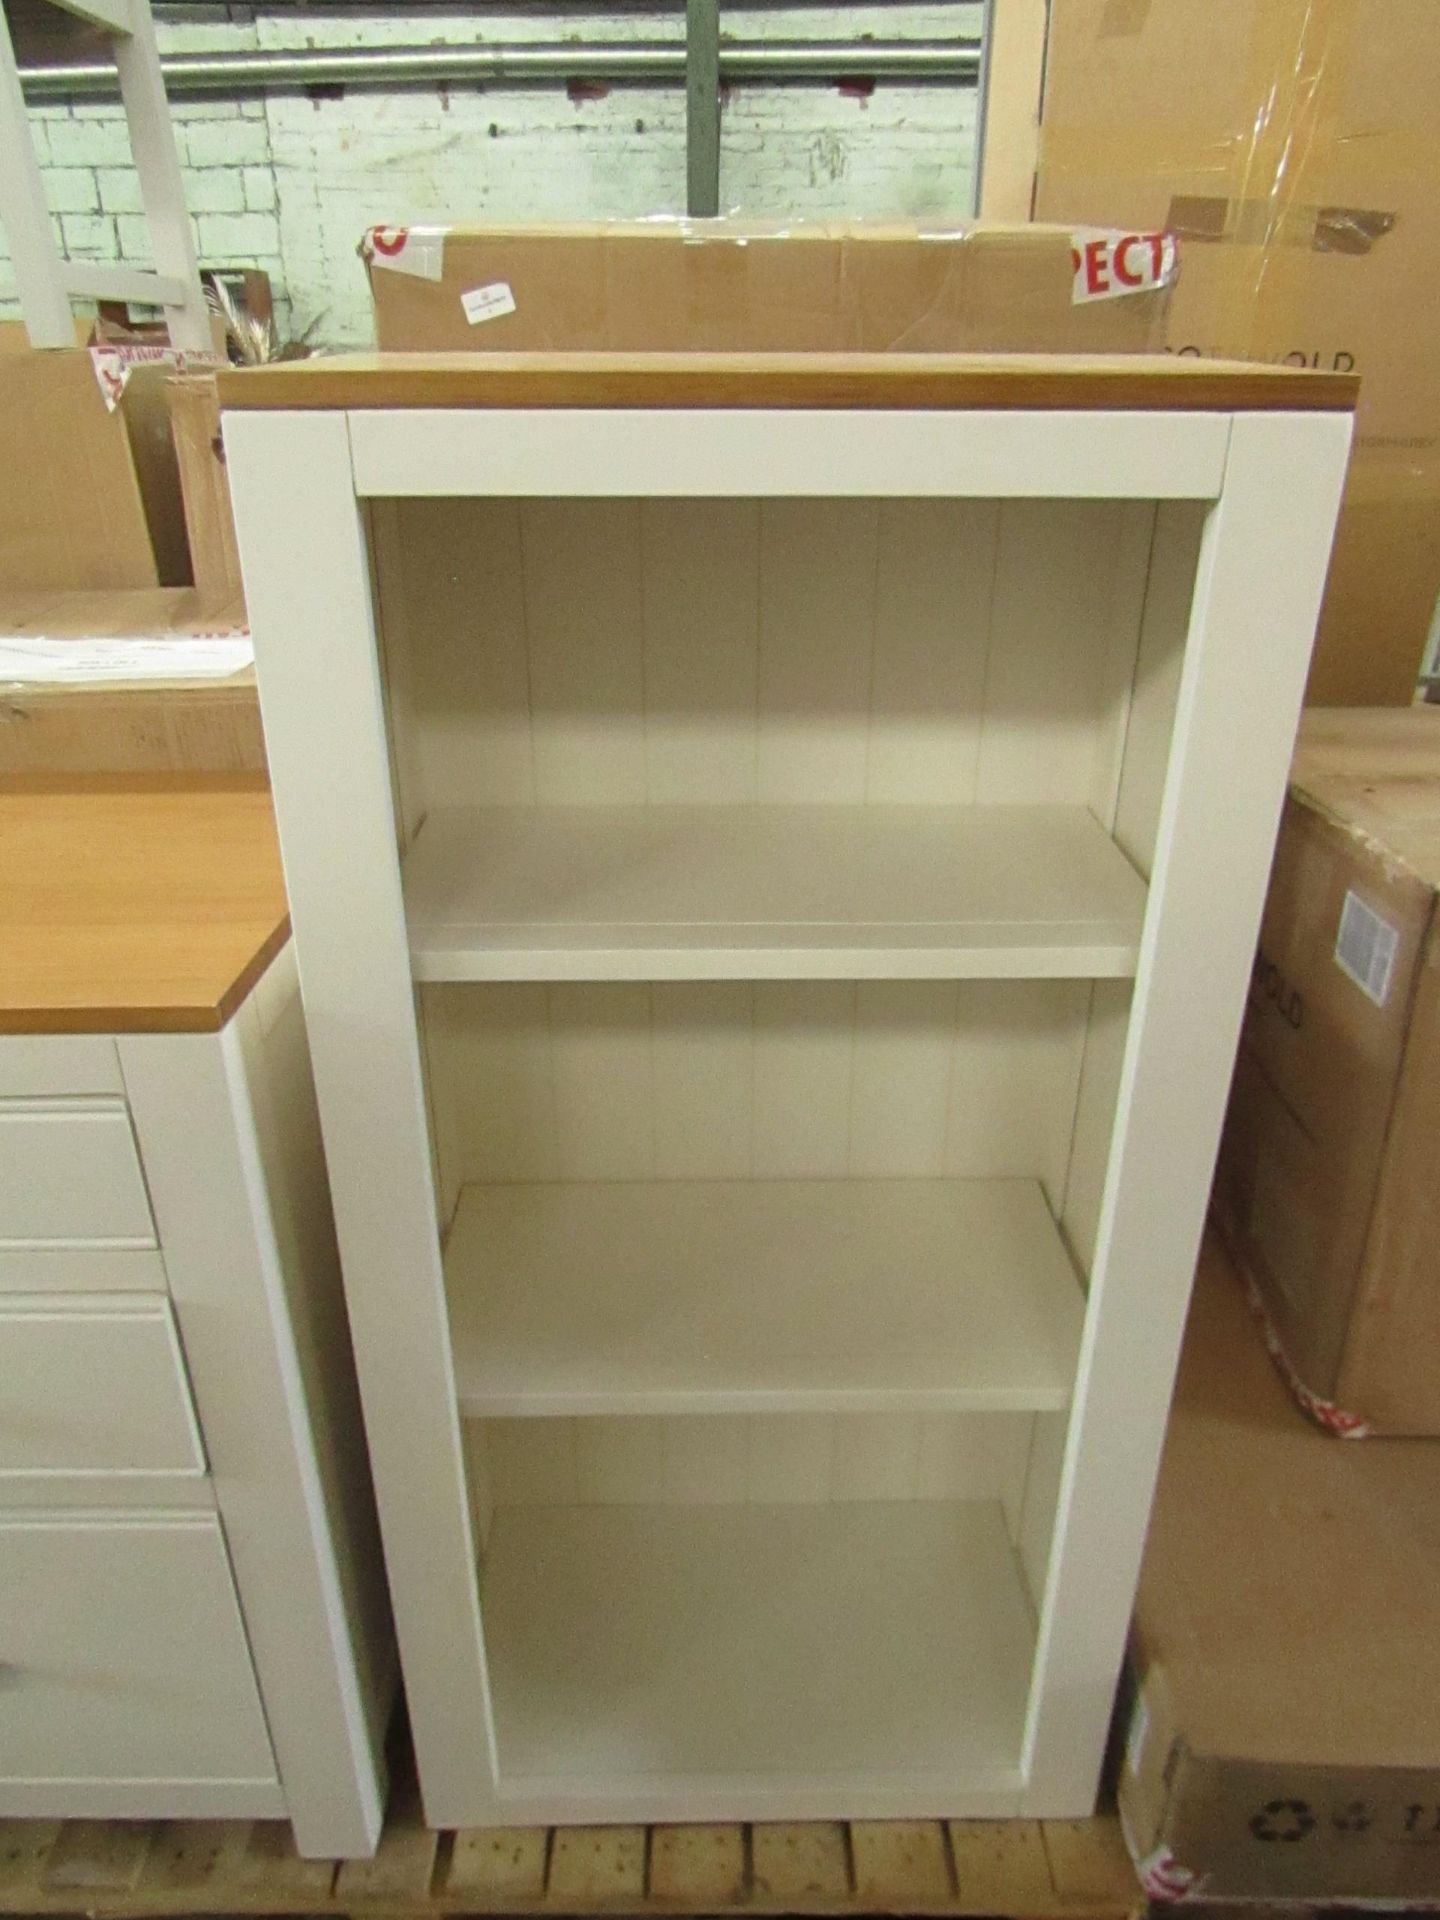 Cotswold Company Chalford Warm White Desk Top Bookcase RRP Â£185.00 - This item looks to be in